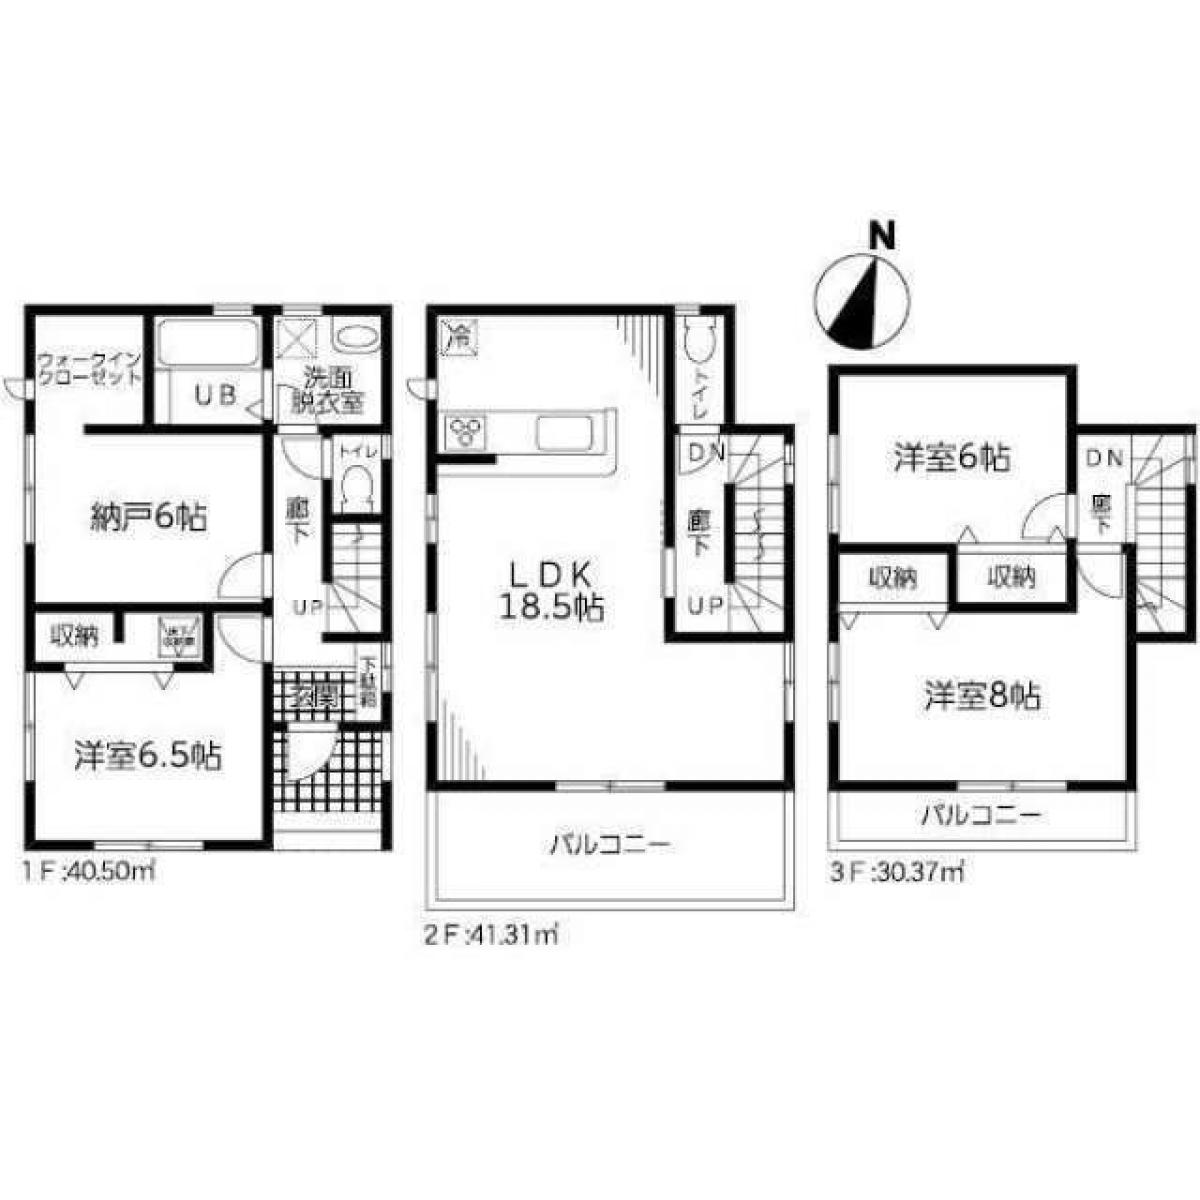 Picture of Home For Sale in Edogawa Ku, Tokyo, Japan